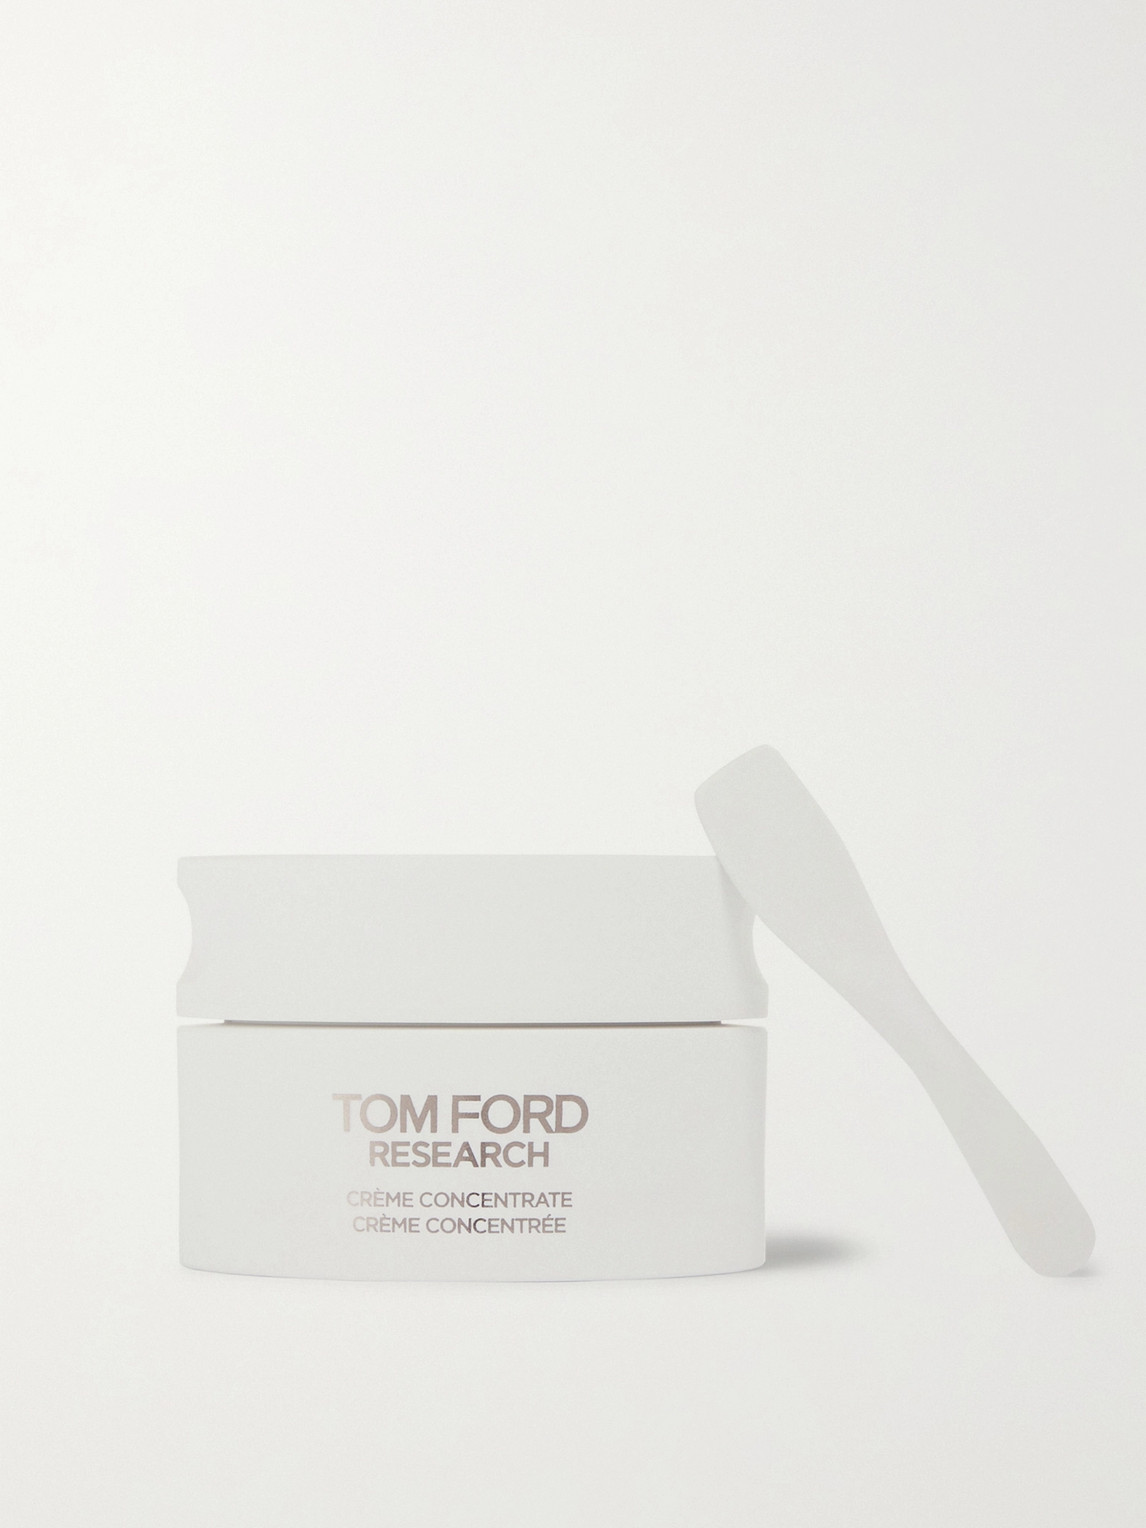 TOM FORD RESEARCH CRÈME CONCENTRATE, 50ML